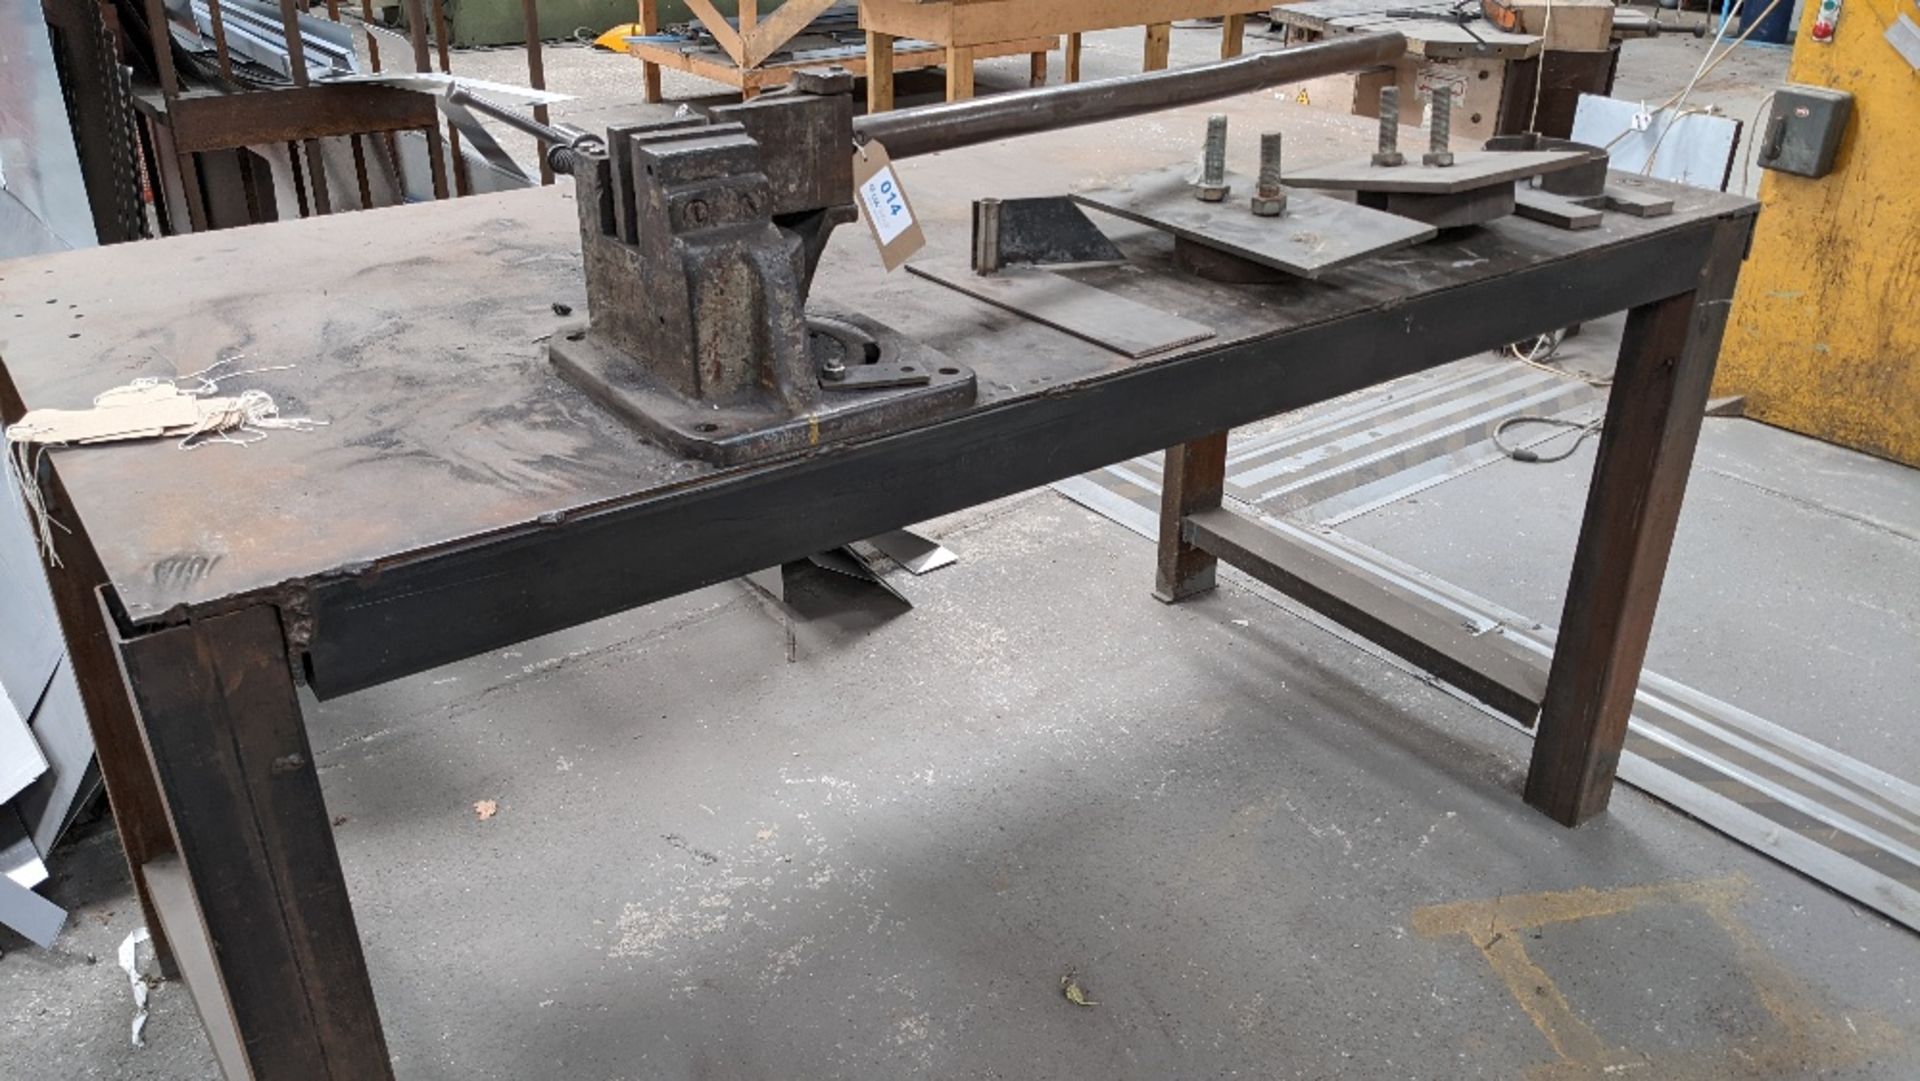 Unbranded table top manual bender with steel workbench